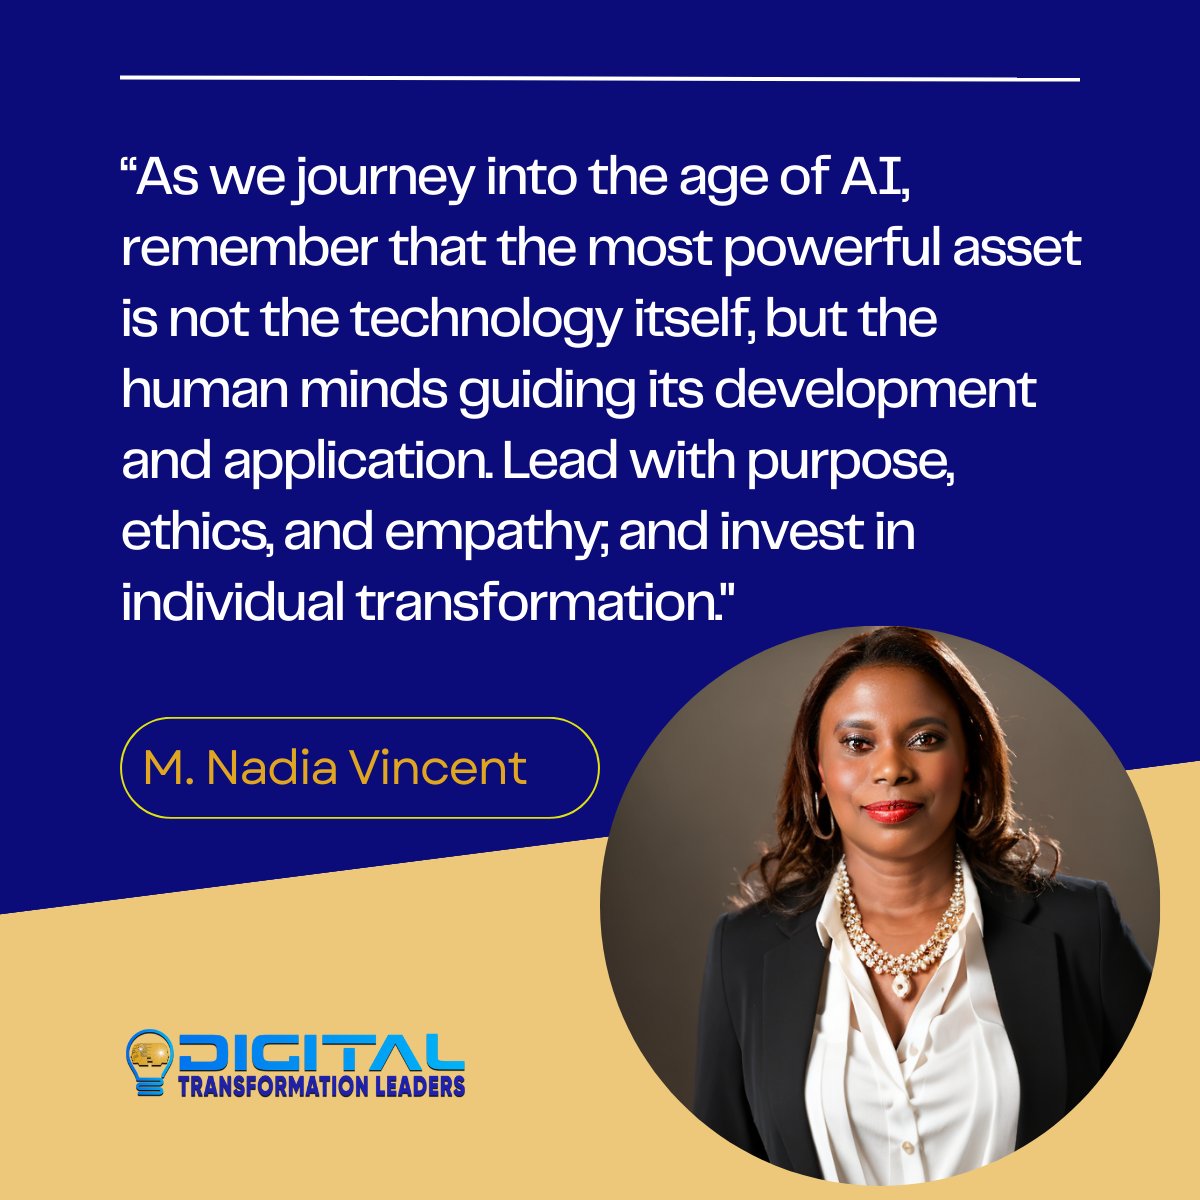 As we journey into the AI age, remember that the most powerful asset is not the technology itself, but the human minds guiding its development and application. Lead with purpose; and invest in individual transformation. M. Nadia Vincent #individualtransformation #AI #leadership